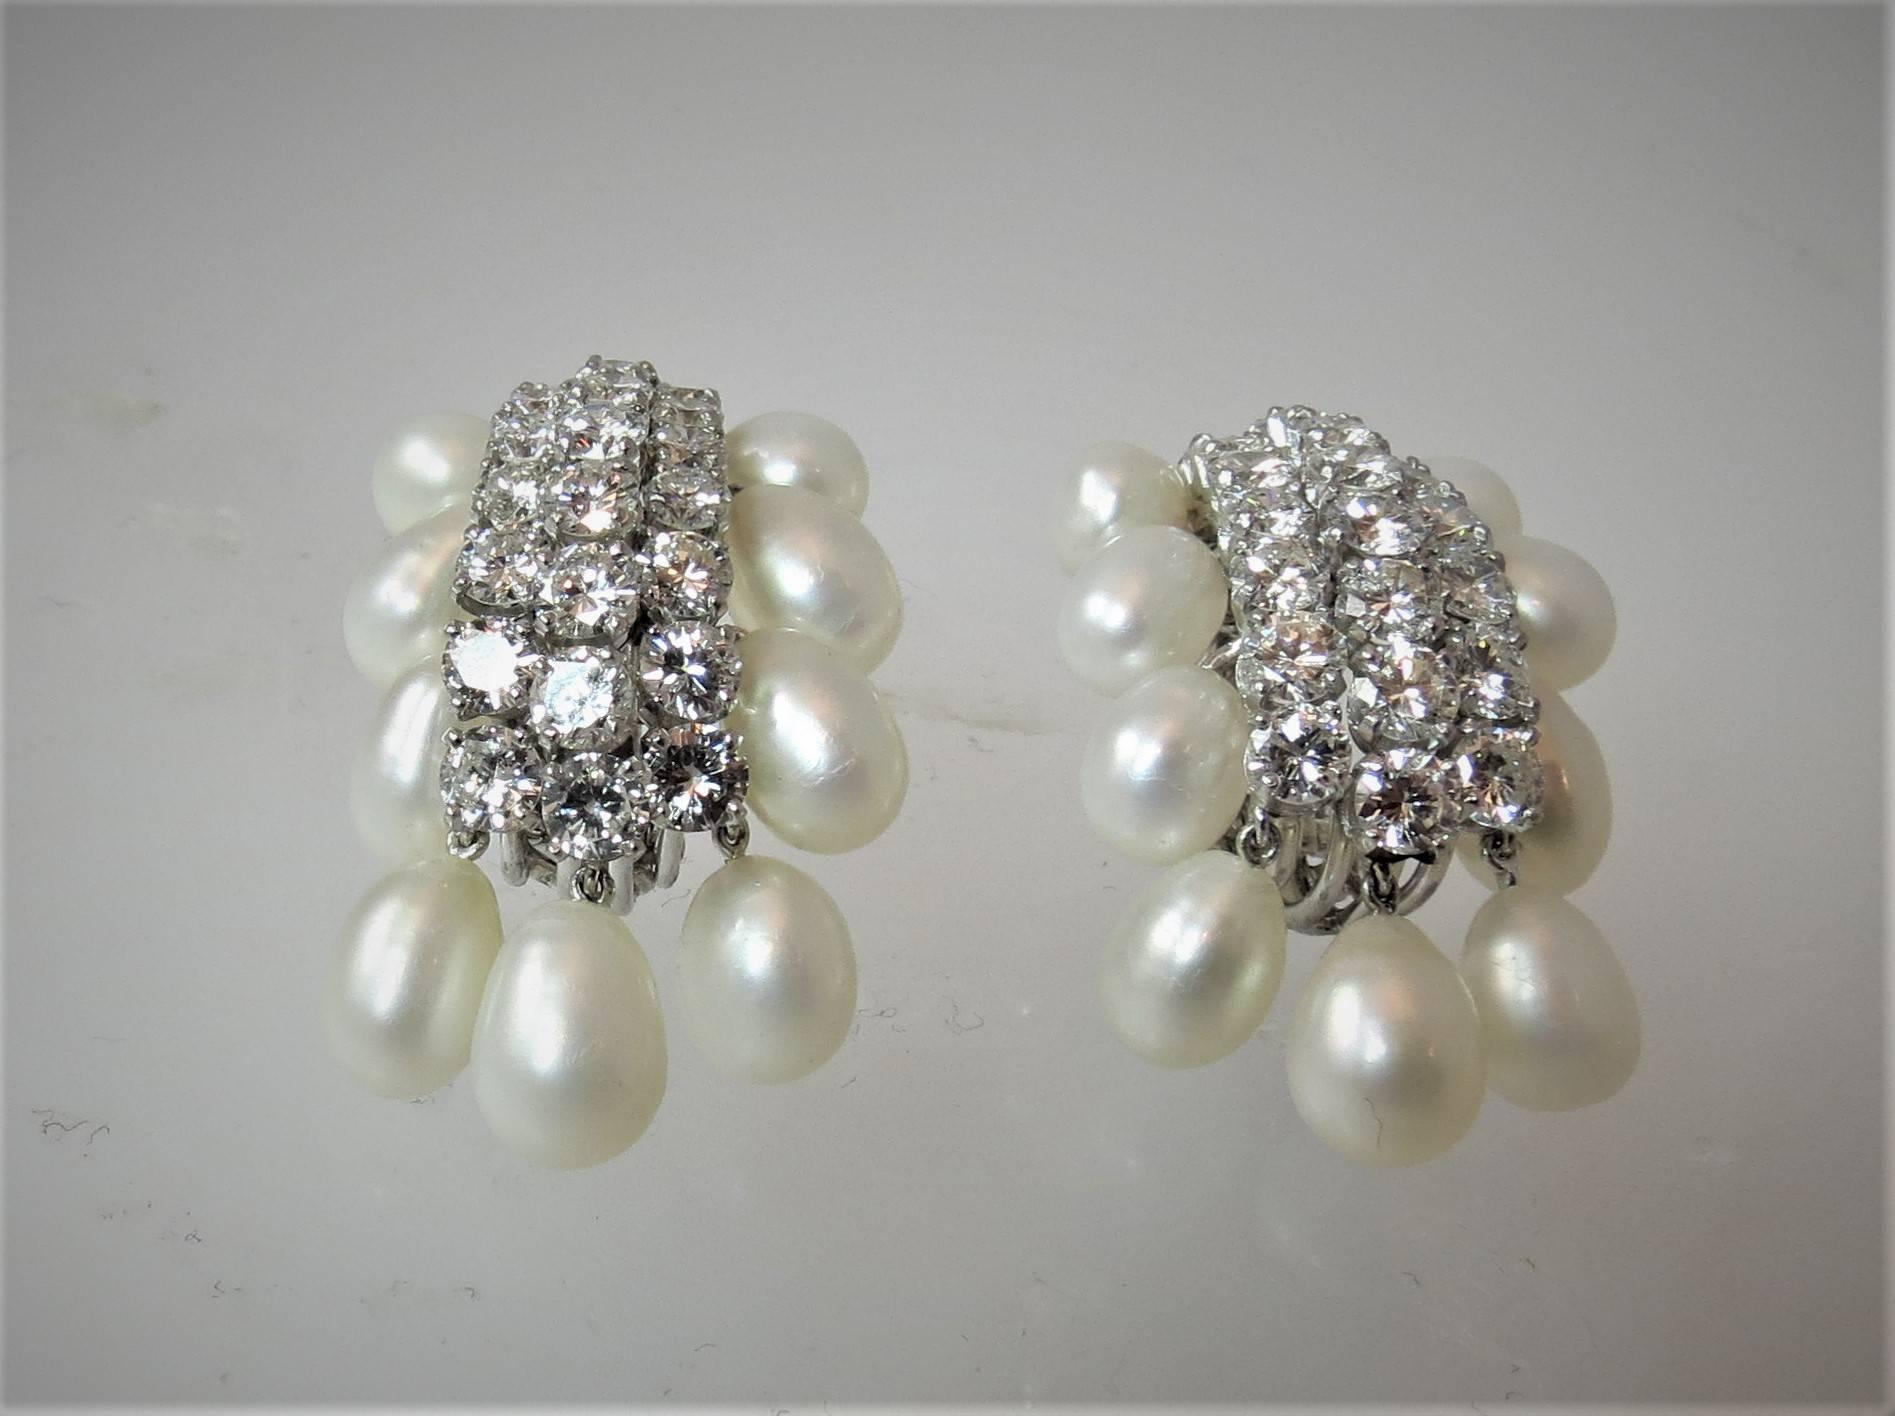 Contemporary Stunning David Webb Platinum and Diamond Biwi Cultured Pearl Earrings For Sale